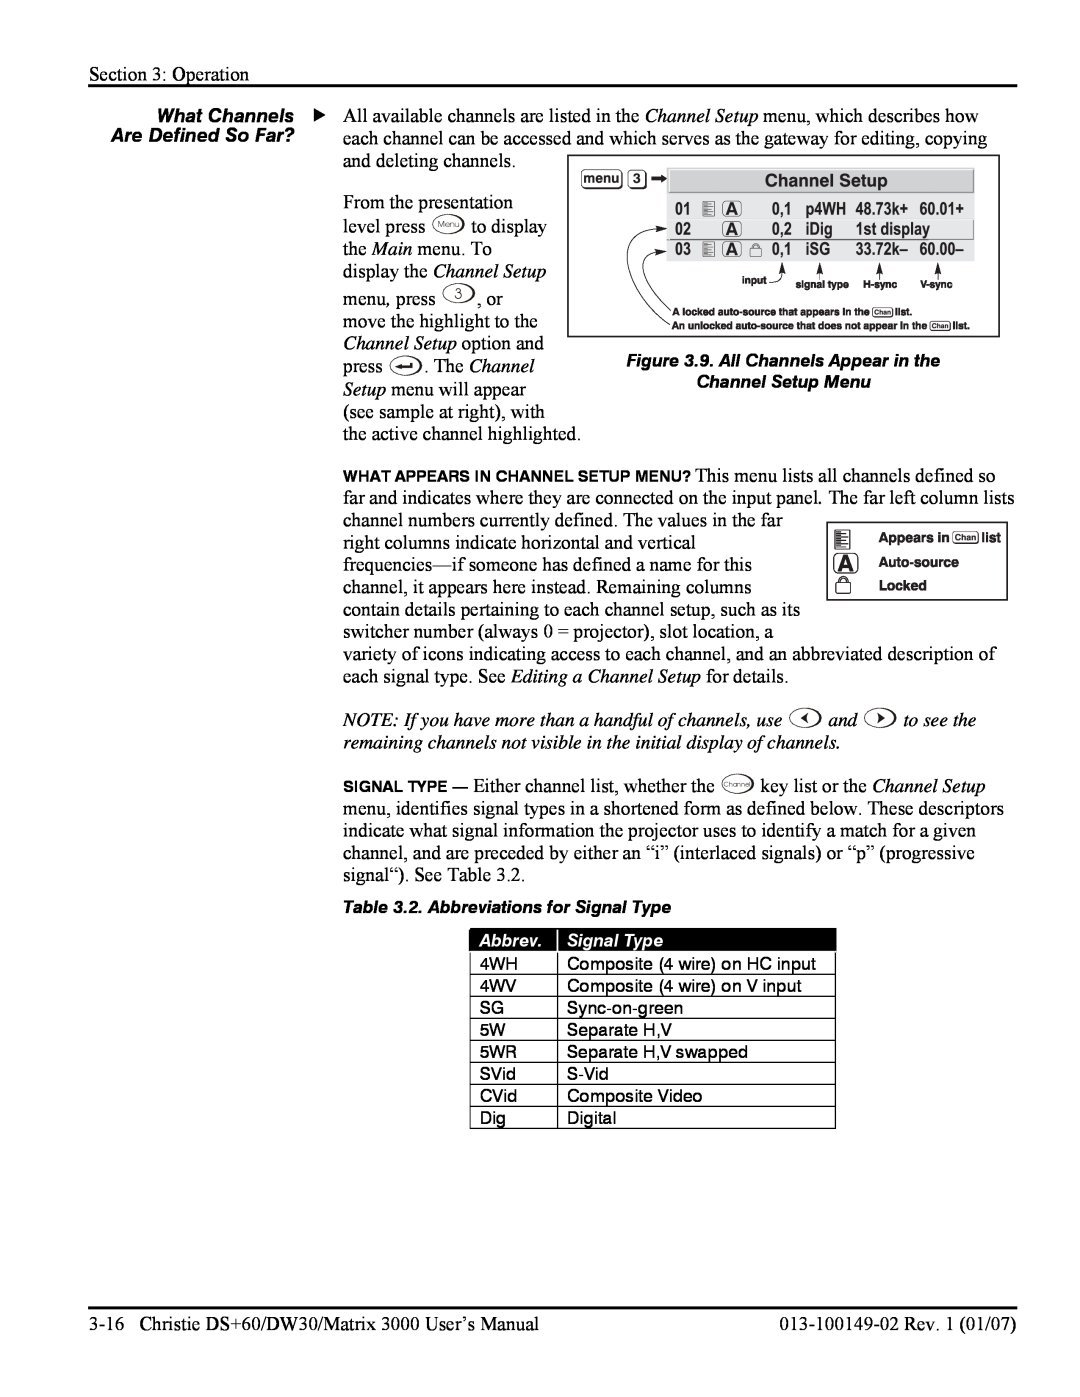 Texas Instruments DW30, MATRIX 3000 user manual What Channels, display the Channel Setup 